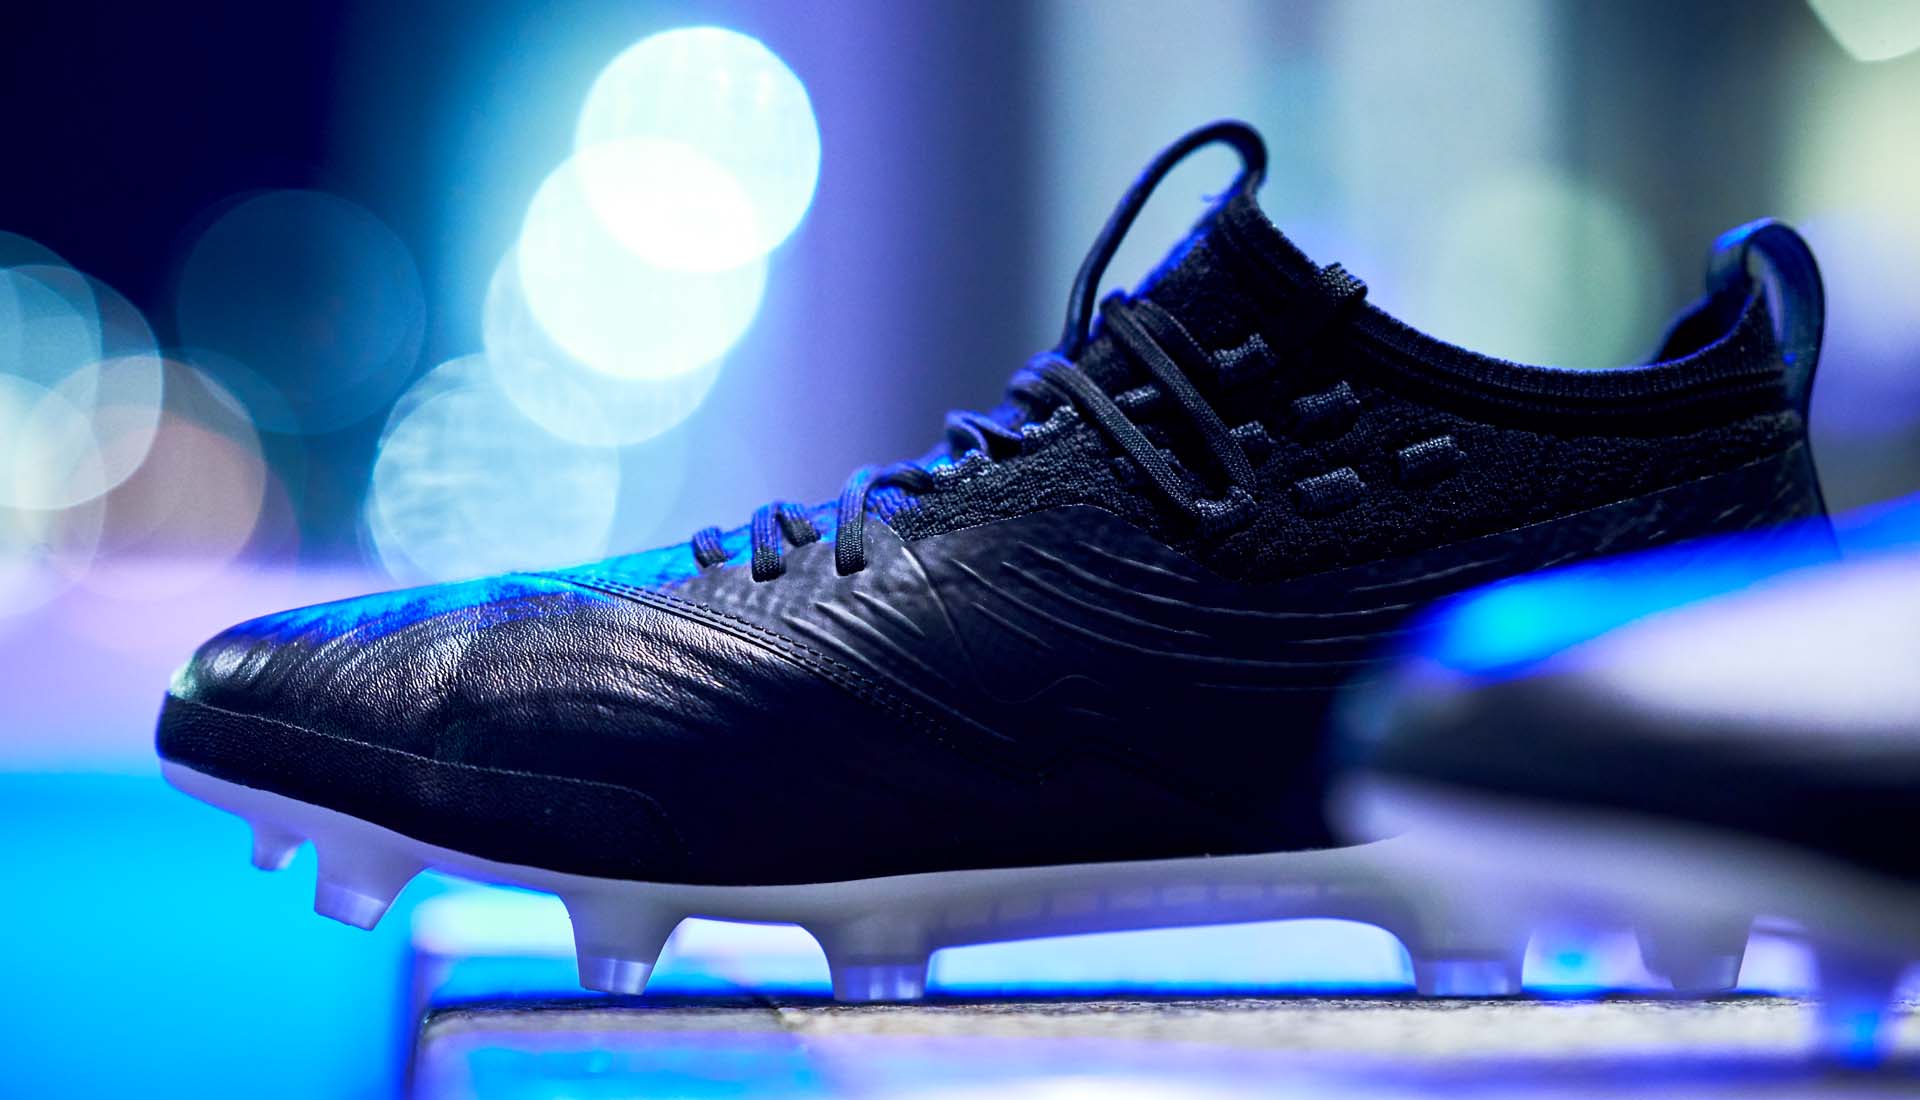 PUMA Launch The "Eclipse Pack" SoccerBible